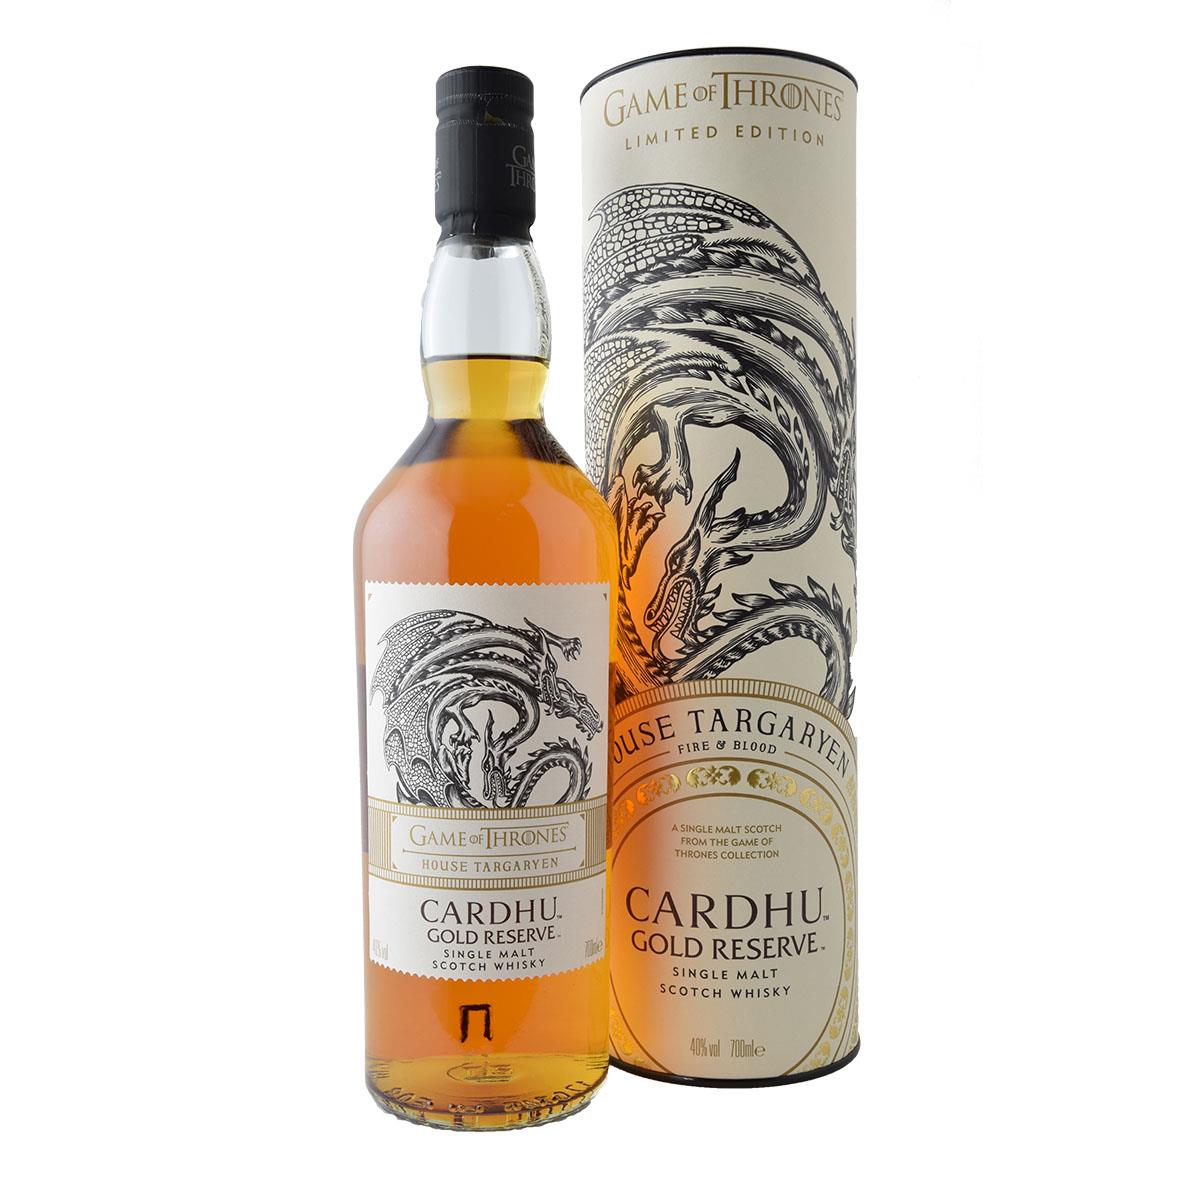 Cardhu Gold Reserve Game of Thrones 700ml